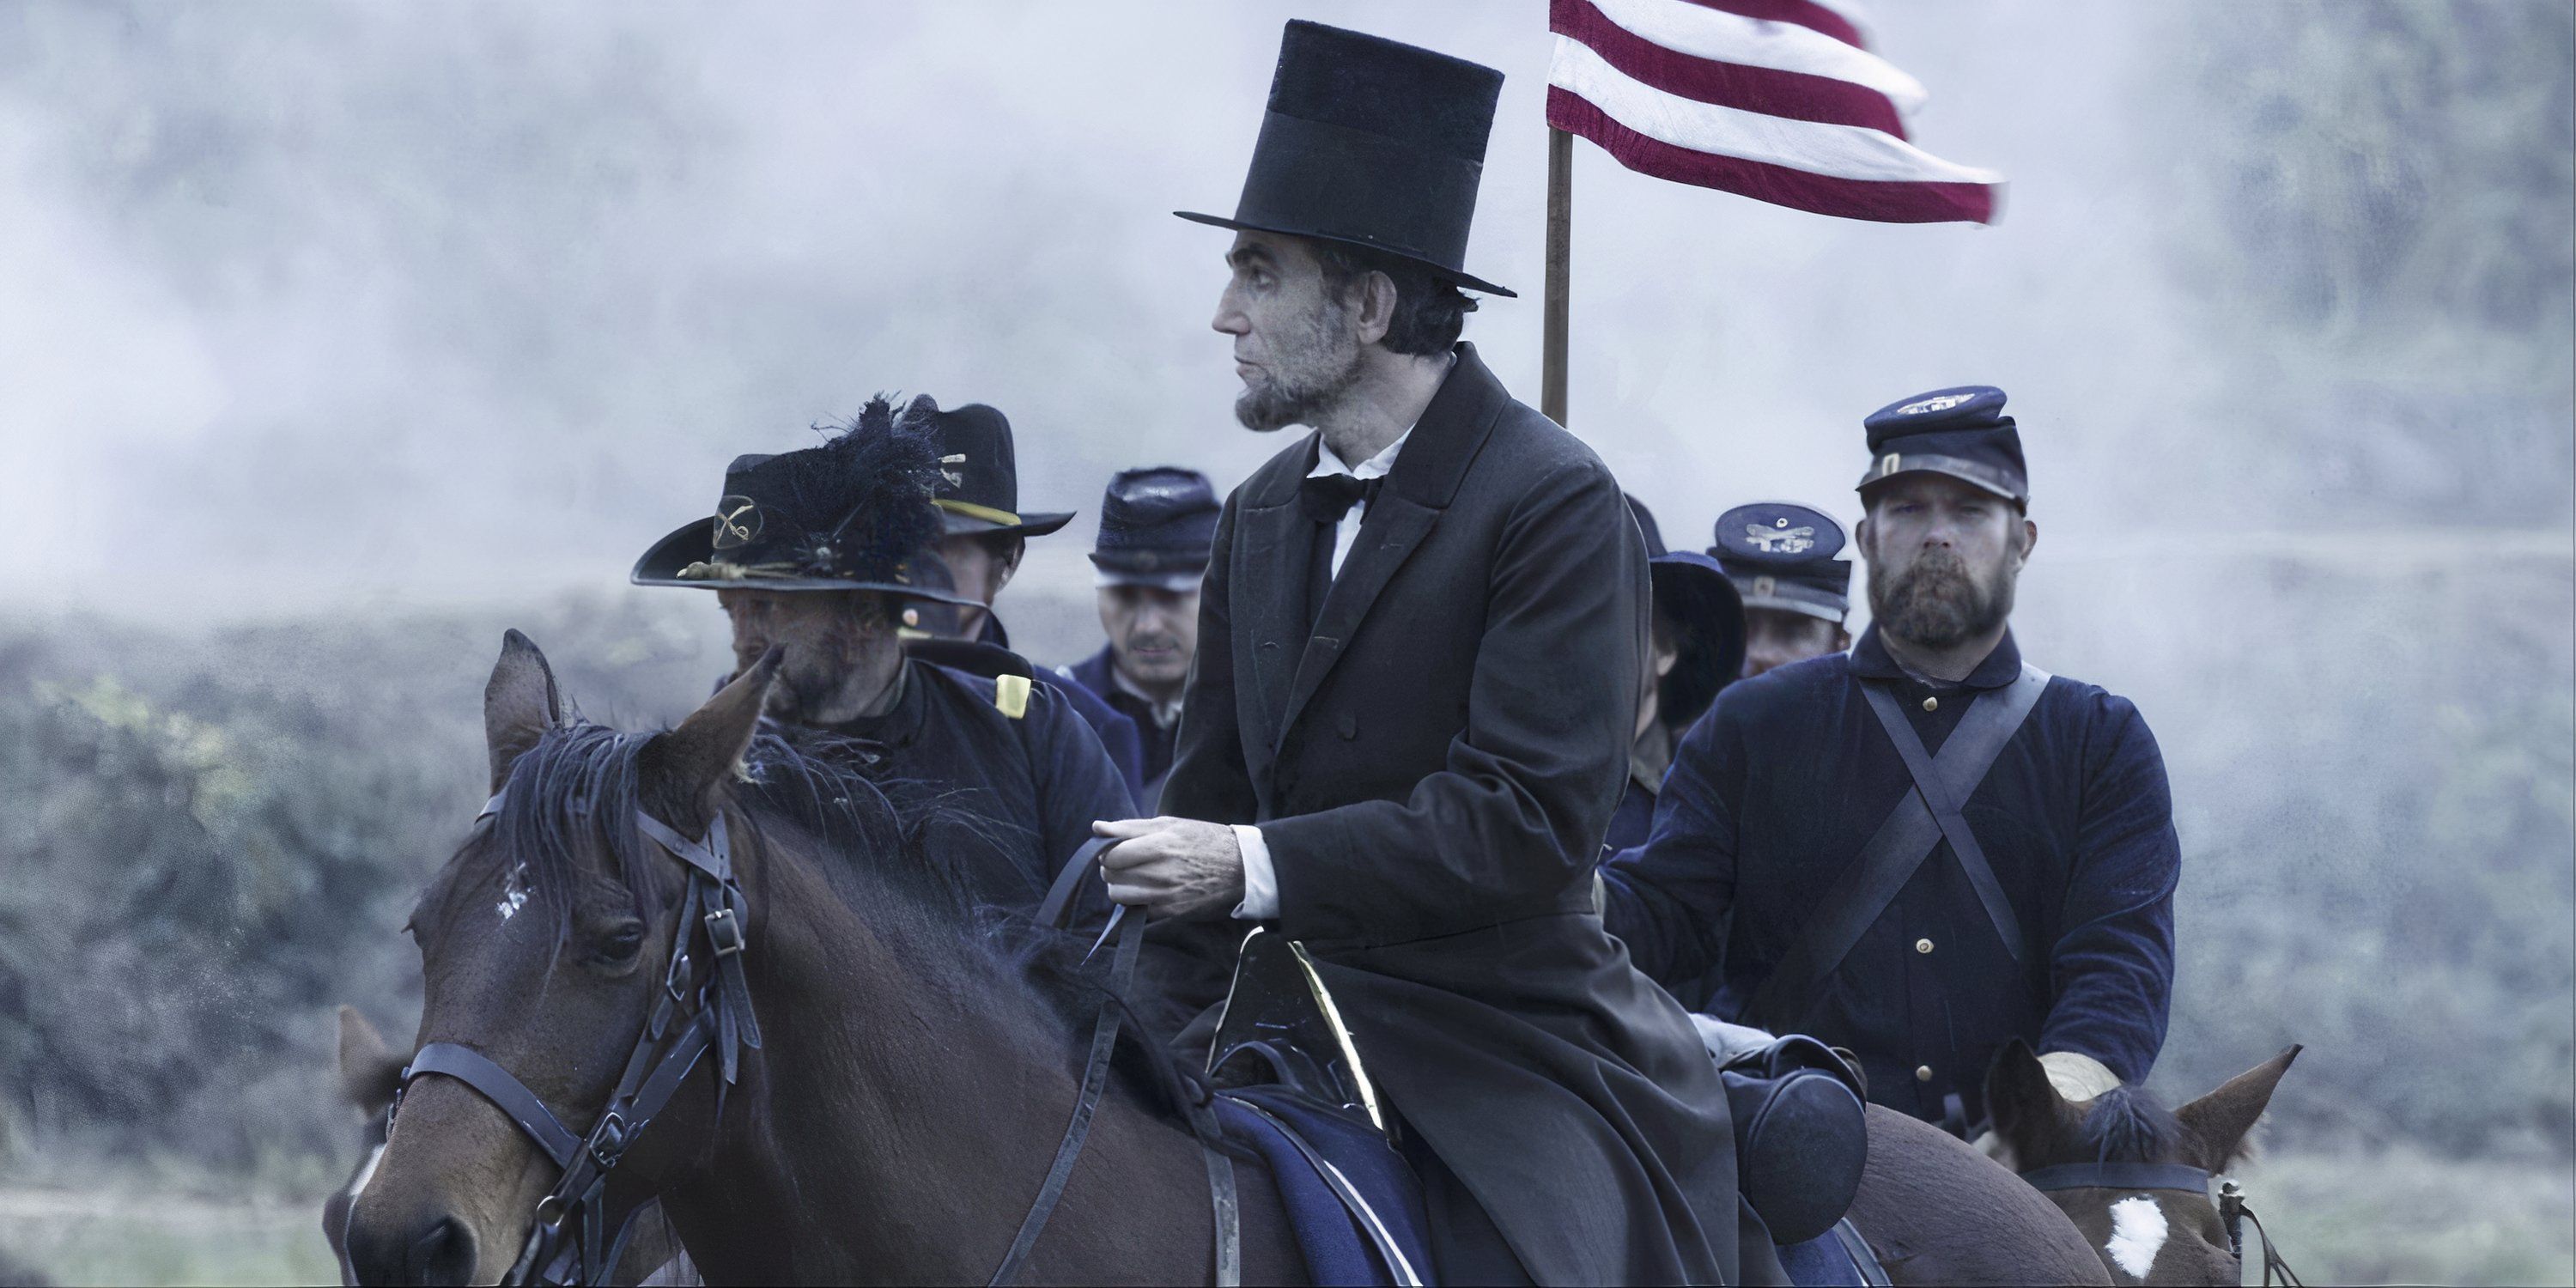 Daniel Day-Lewis as Abraham Lincoln rides a horse with other soldiers in Lincoln